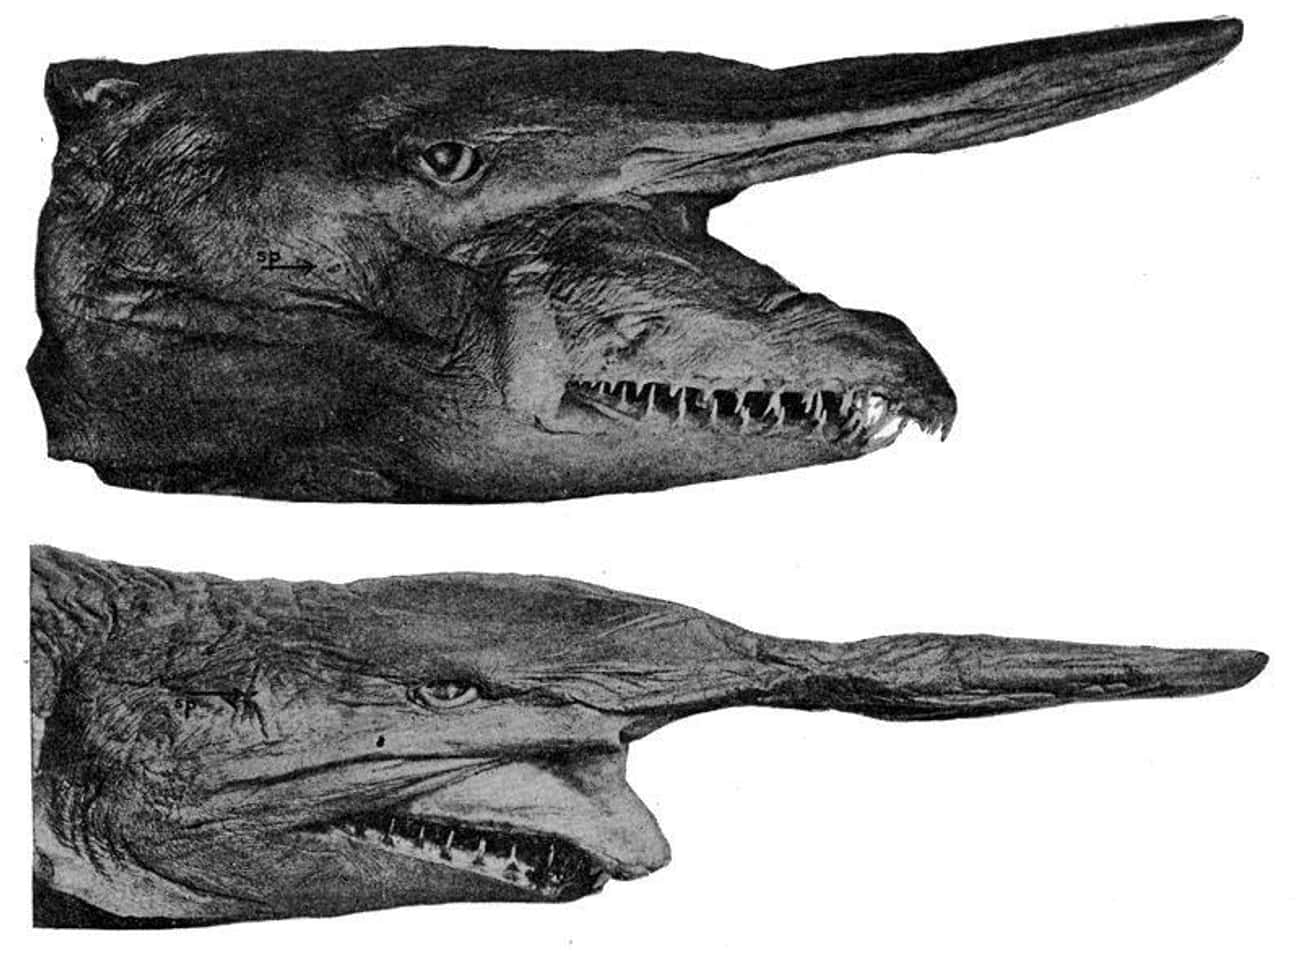 The Goblin Shark Can Elongate Its Jaws To Capture Its Prey